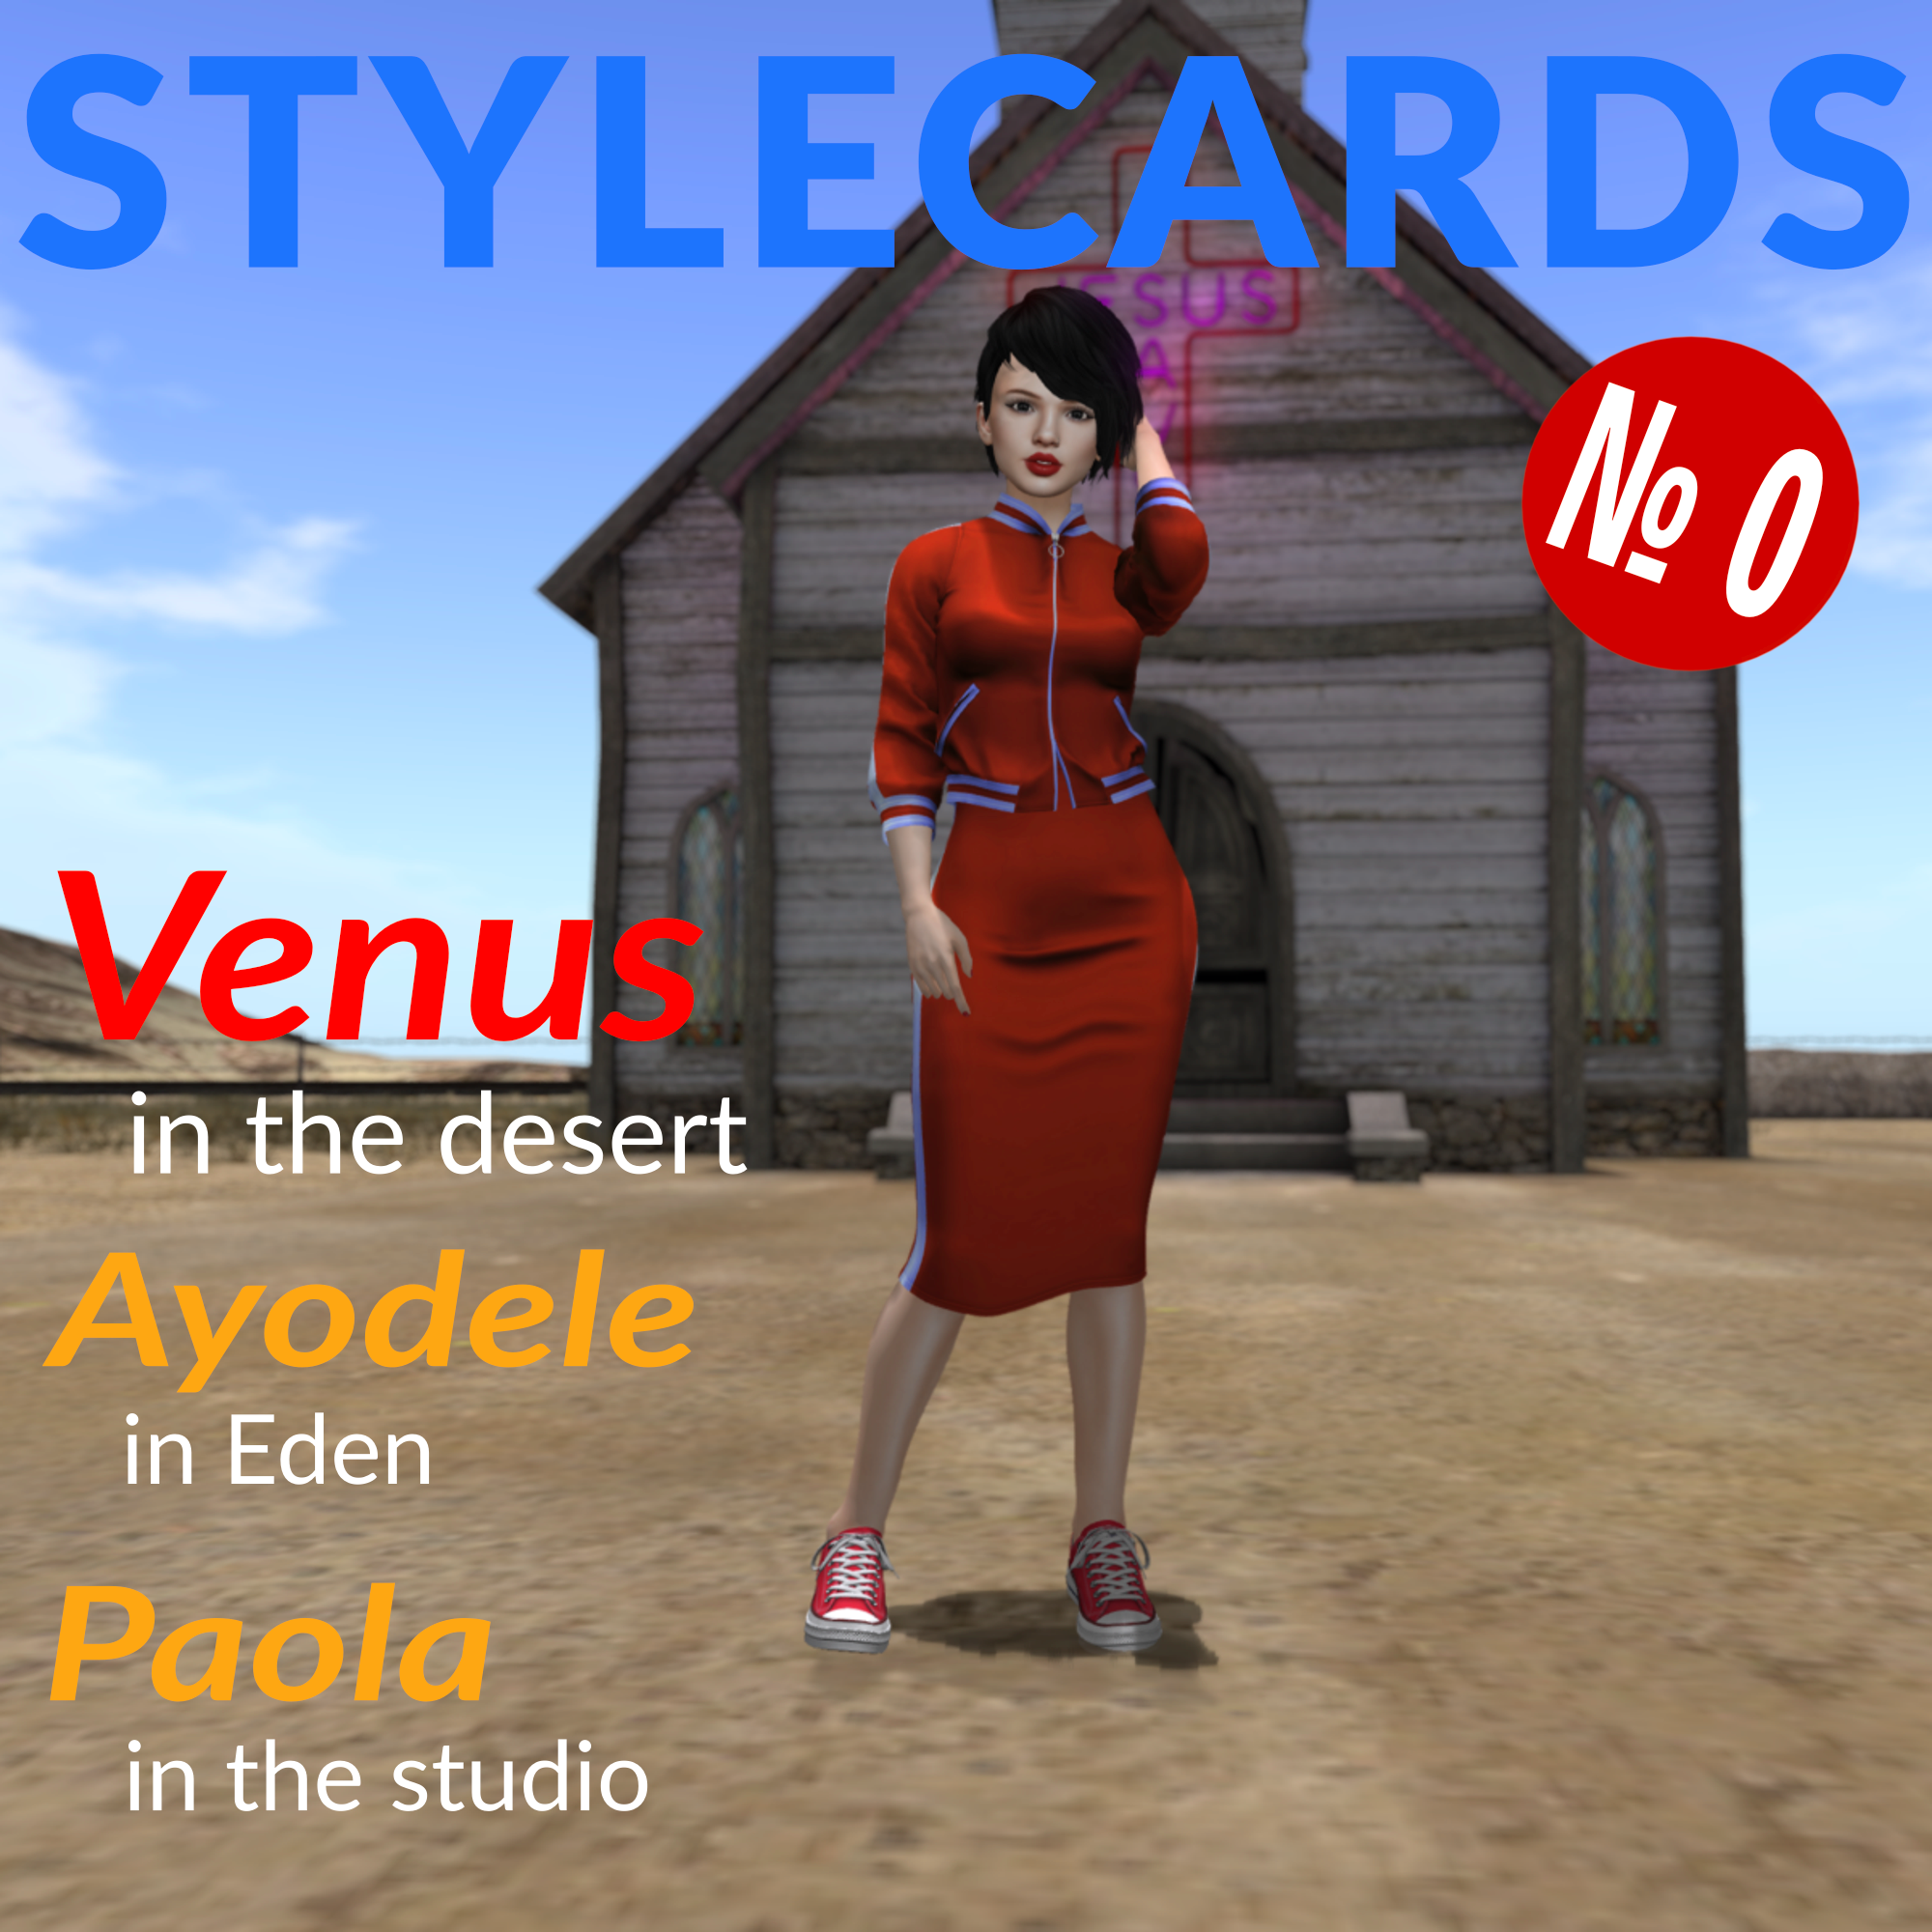 The cover of Stylecards № 0 features Venus Diamandis wearing a matching set of a jacket and skirt in red. In the background is a dilapidated church with a neon sign.